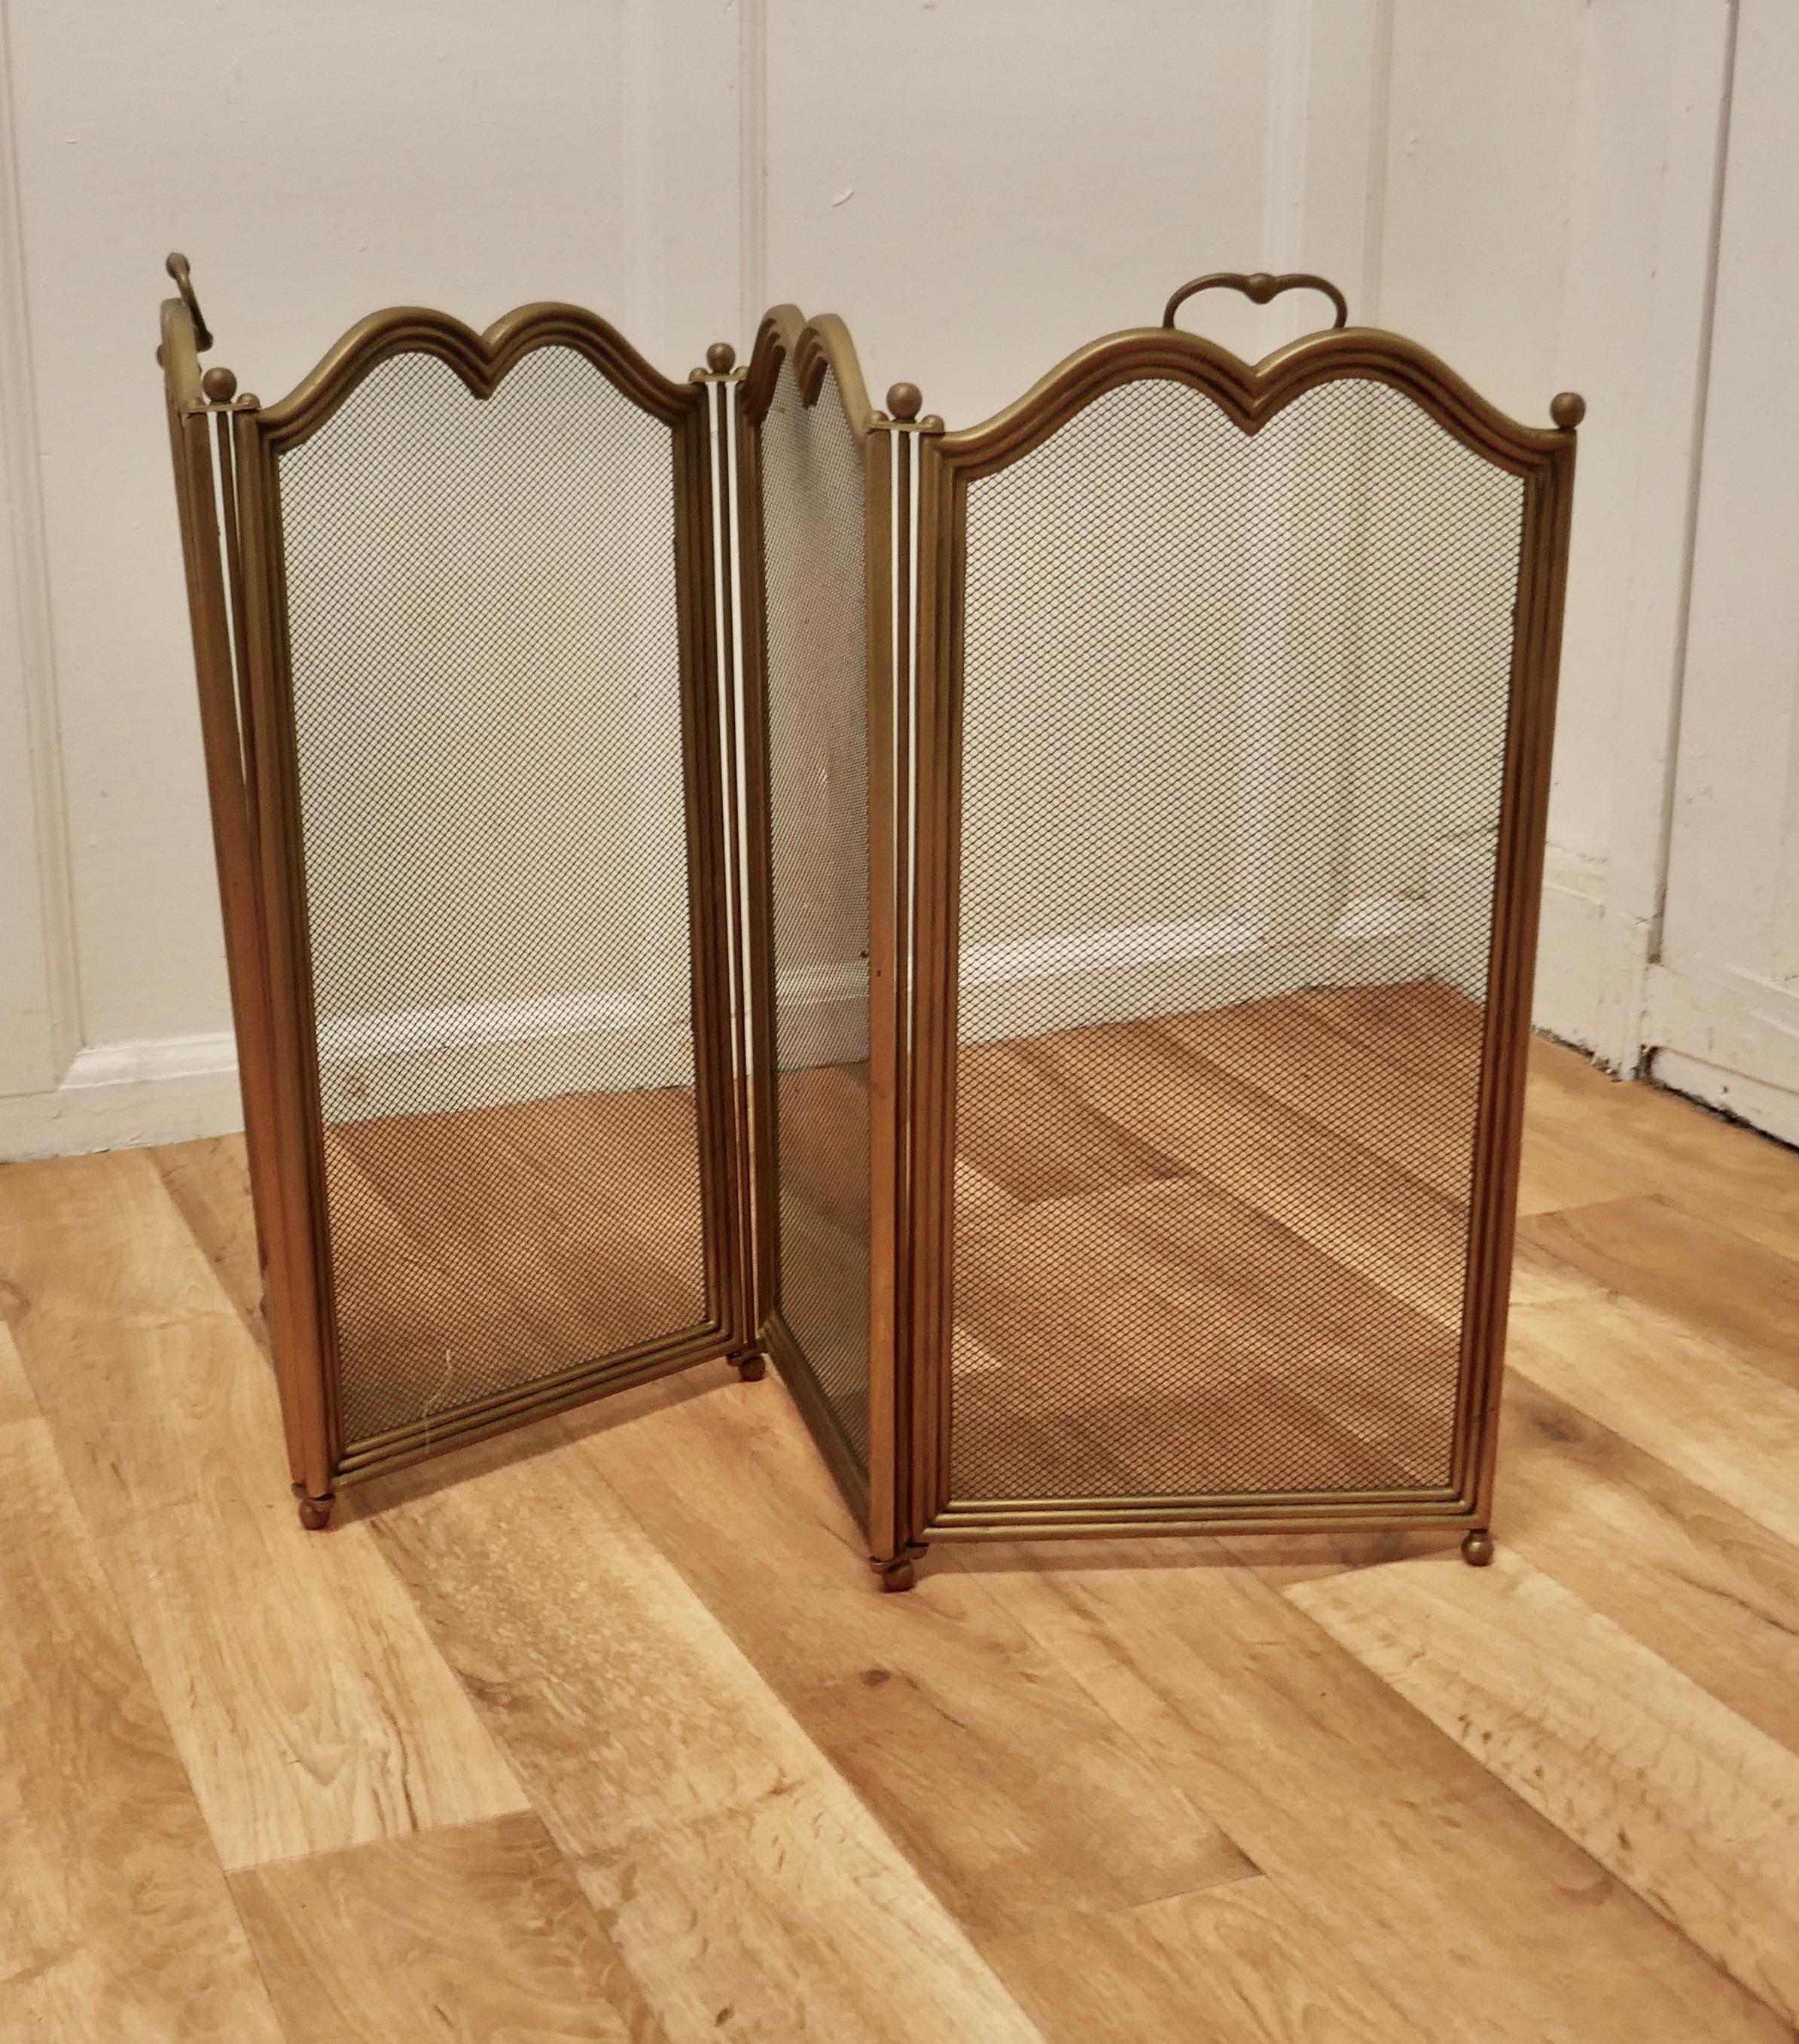 4 Fold Brass Fire Guard for Inglenook Fireplace In Good Condition In Chillerton, Isle of Wight